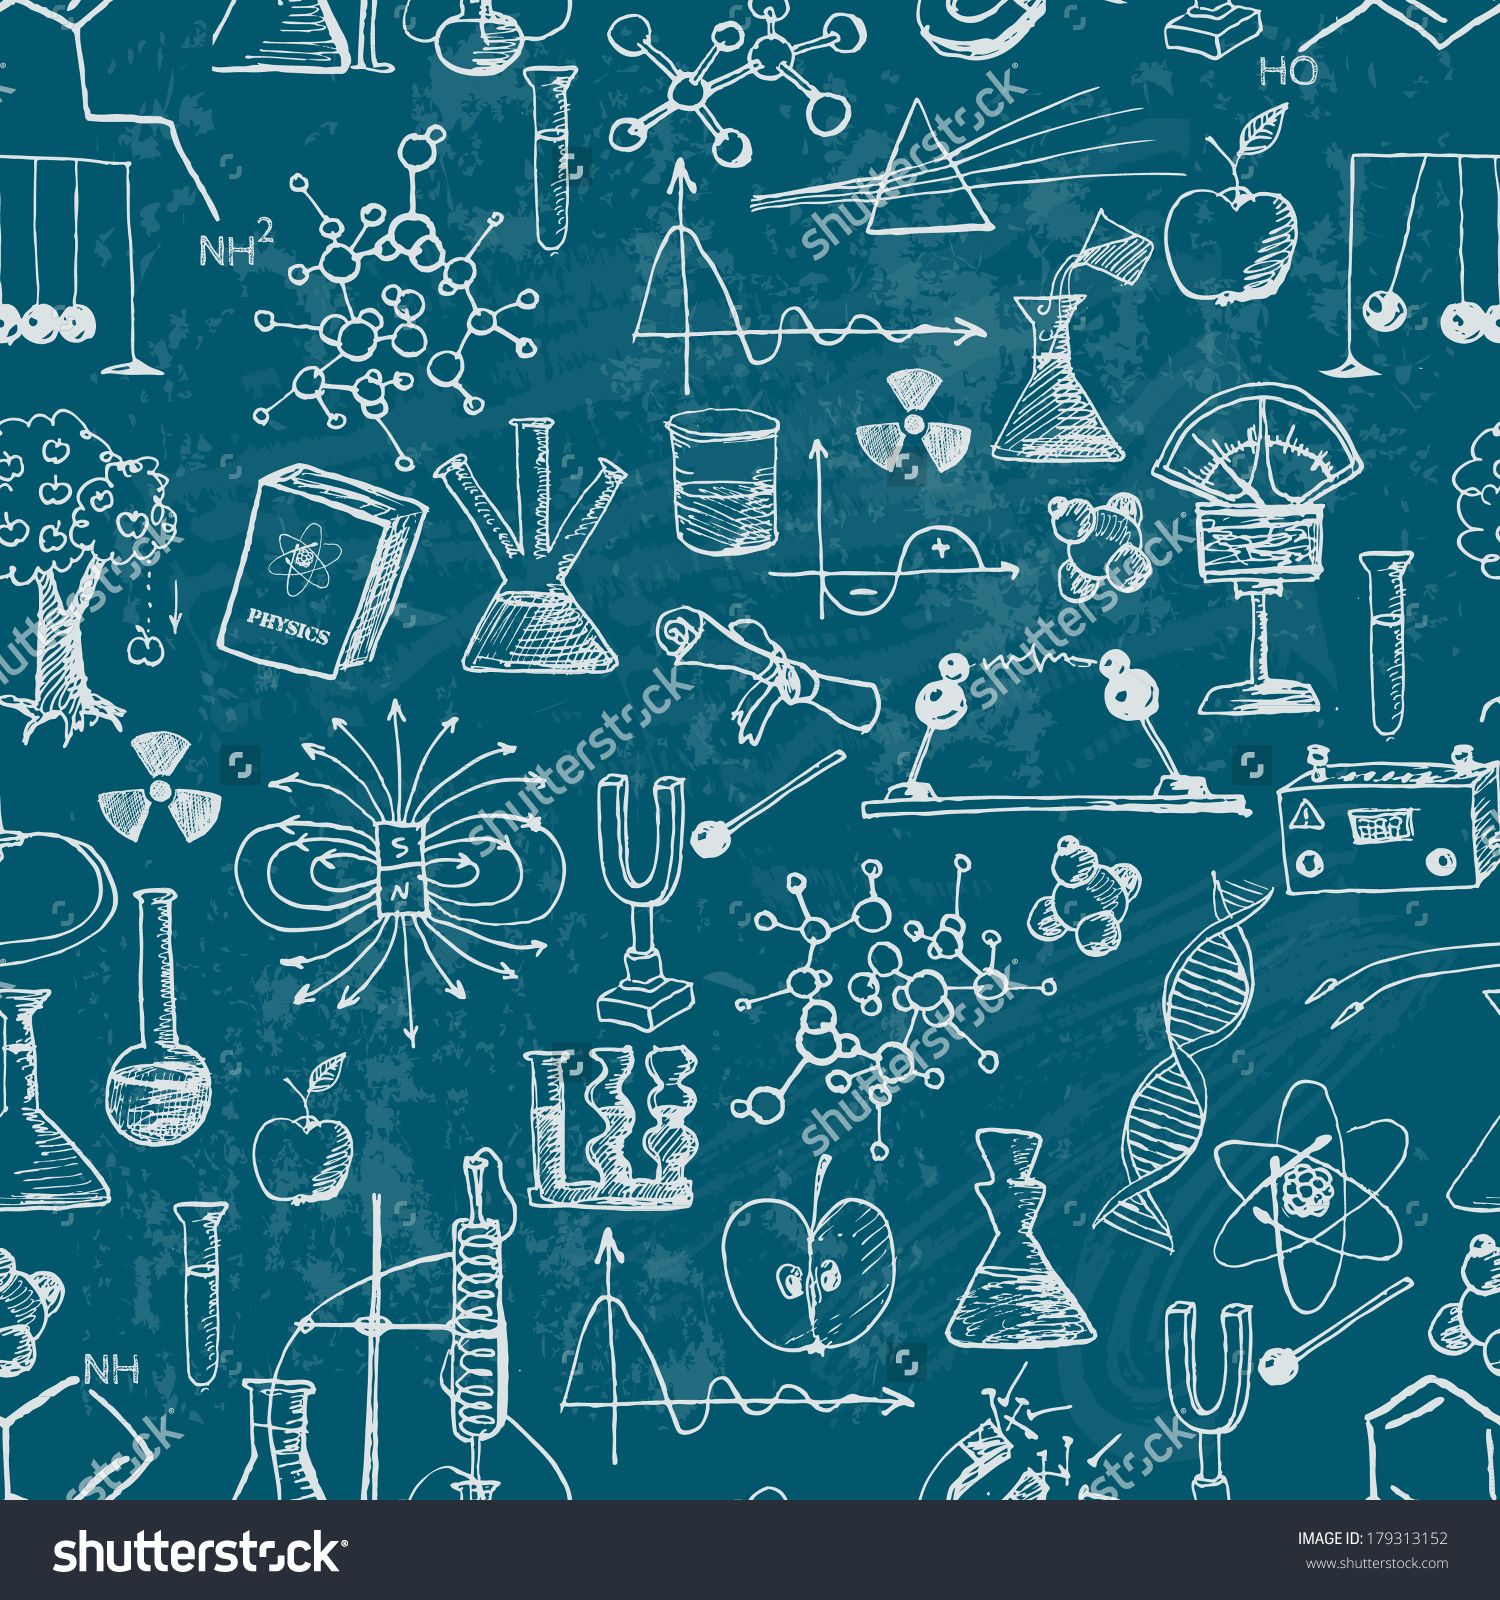 Particle Physics Wallpaper Math Chemistry